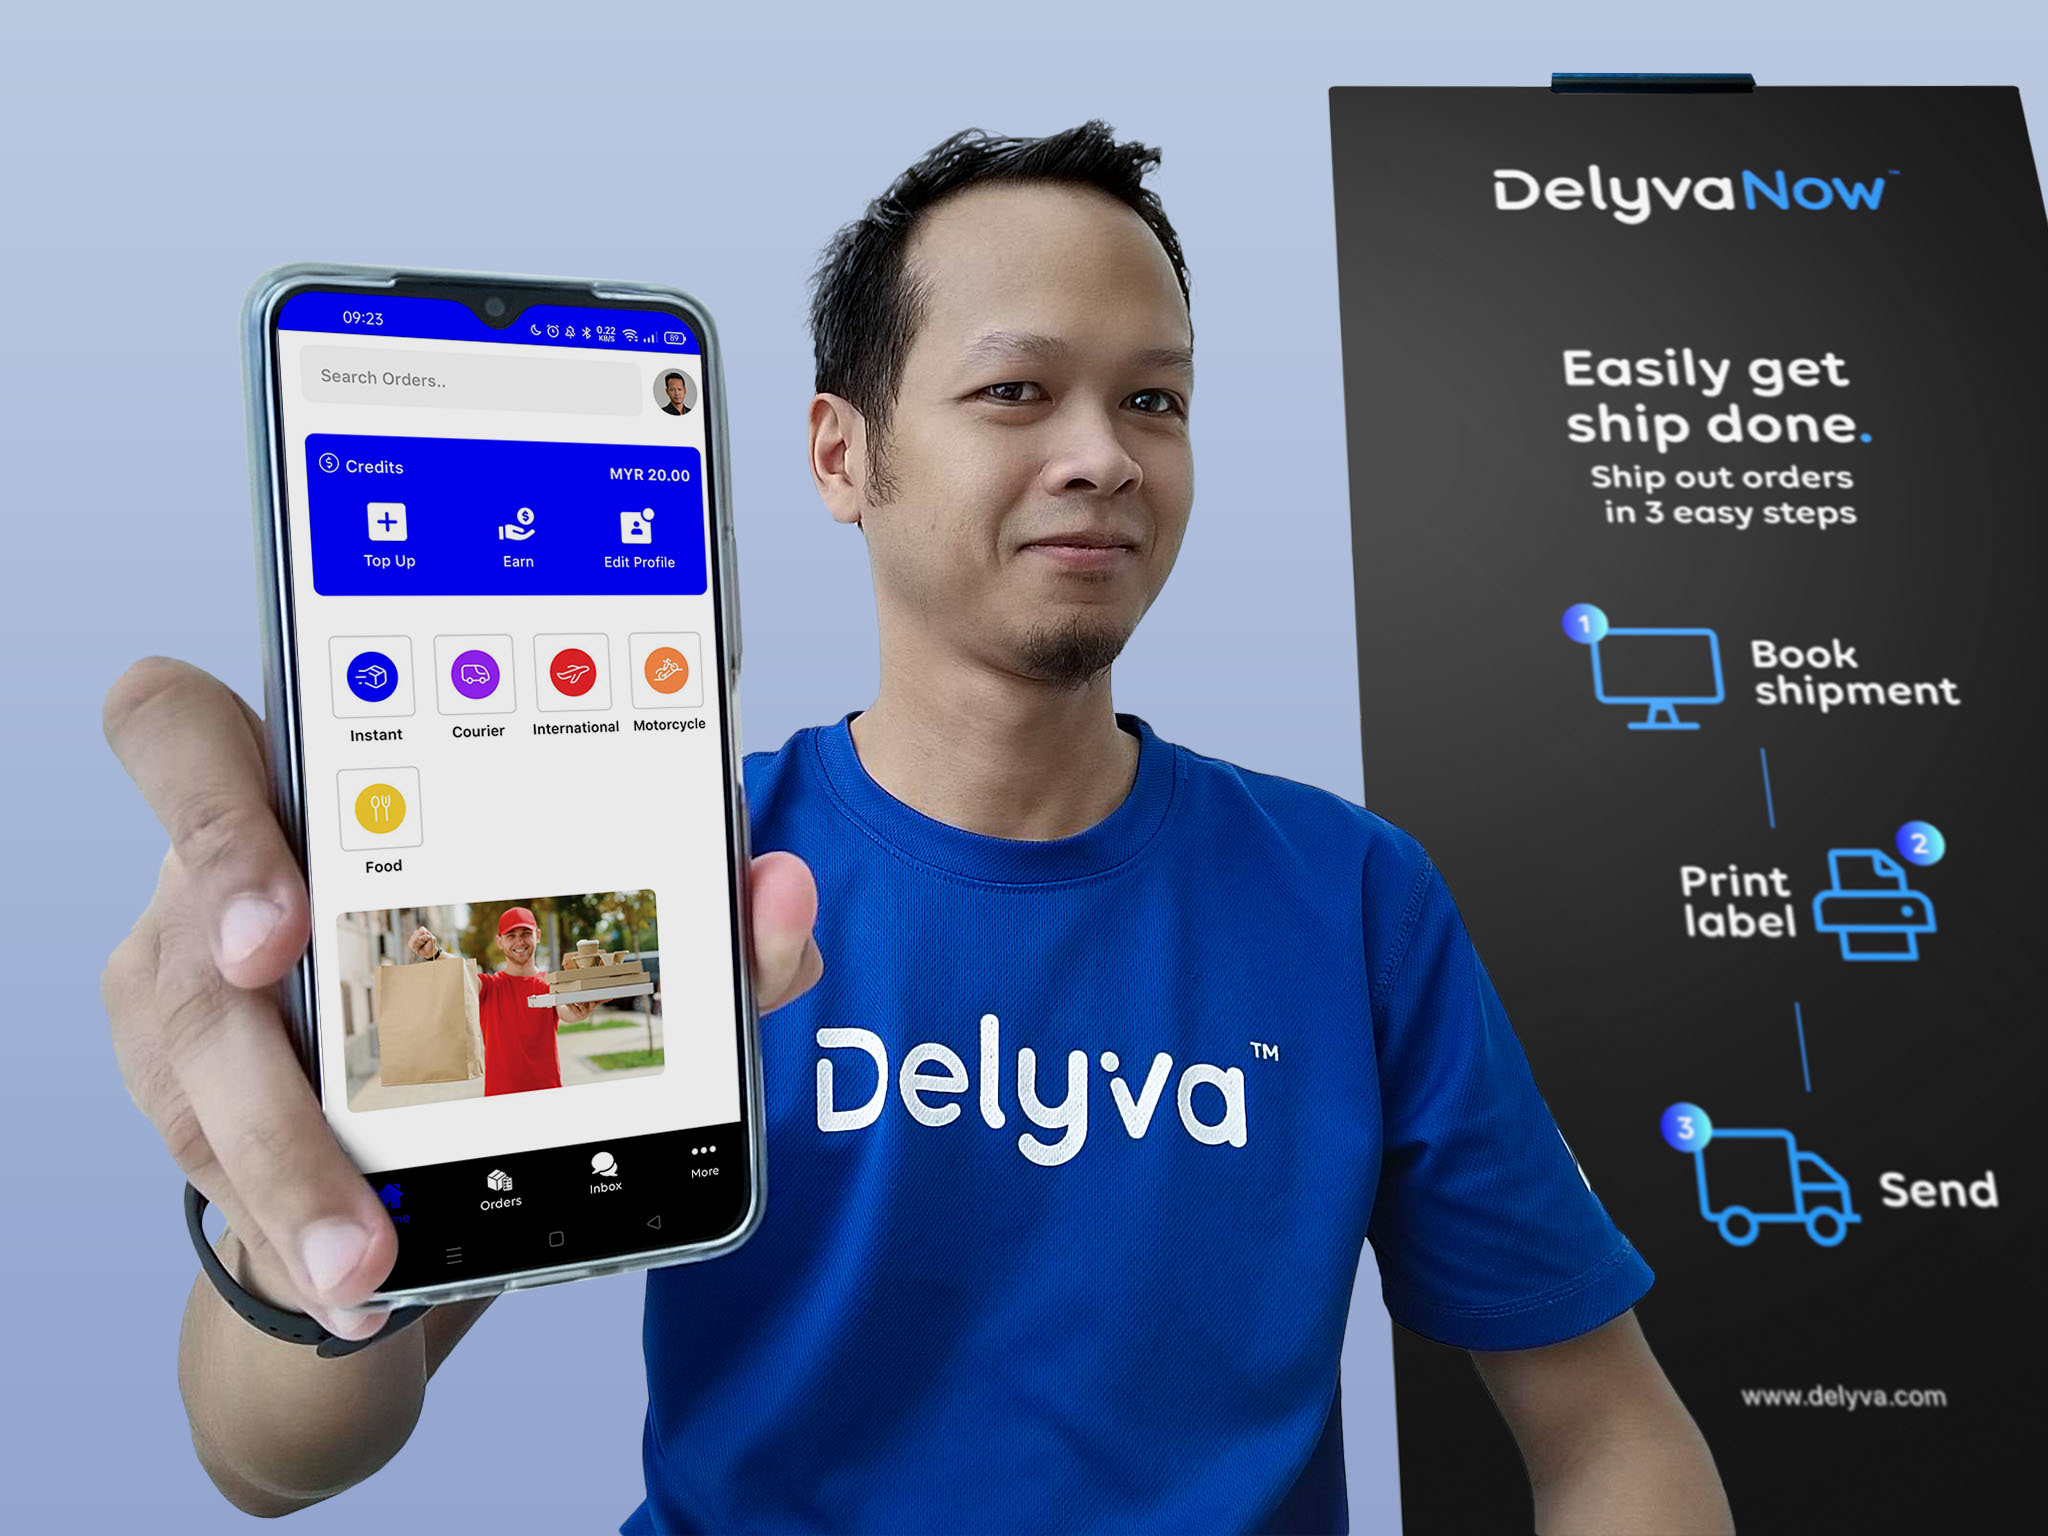 Delyva launches mobile app, introduces nine delivery partners